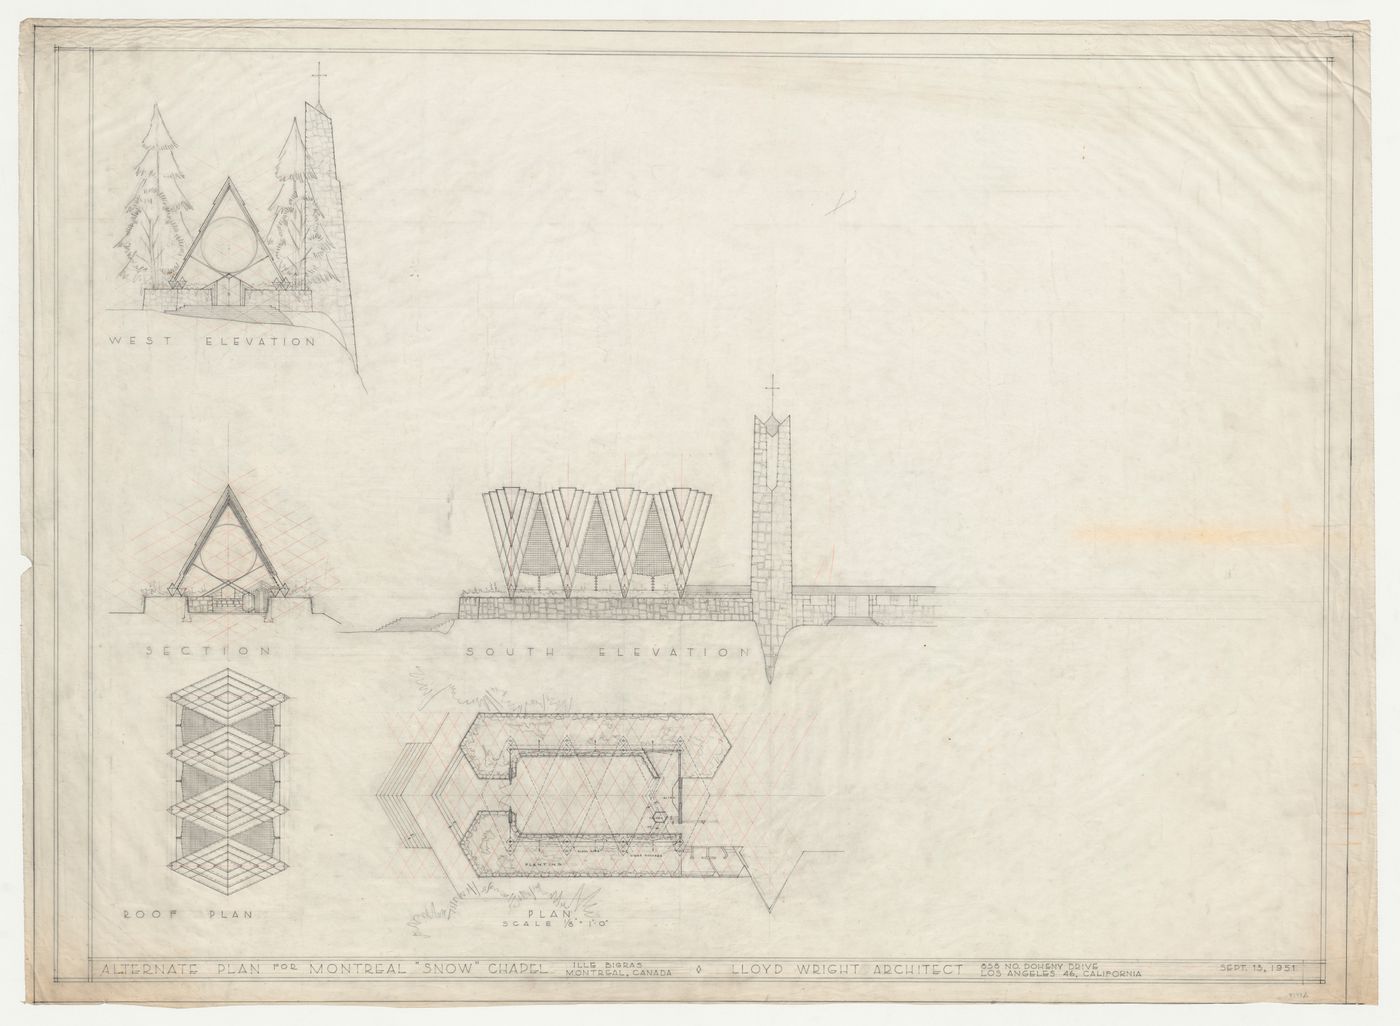 Snow Chapel, Laval, Québec: West and south elevations, section, ground plan and roof plan developed on an equilateral parallelogram grid